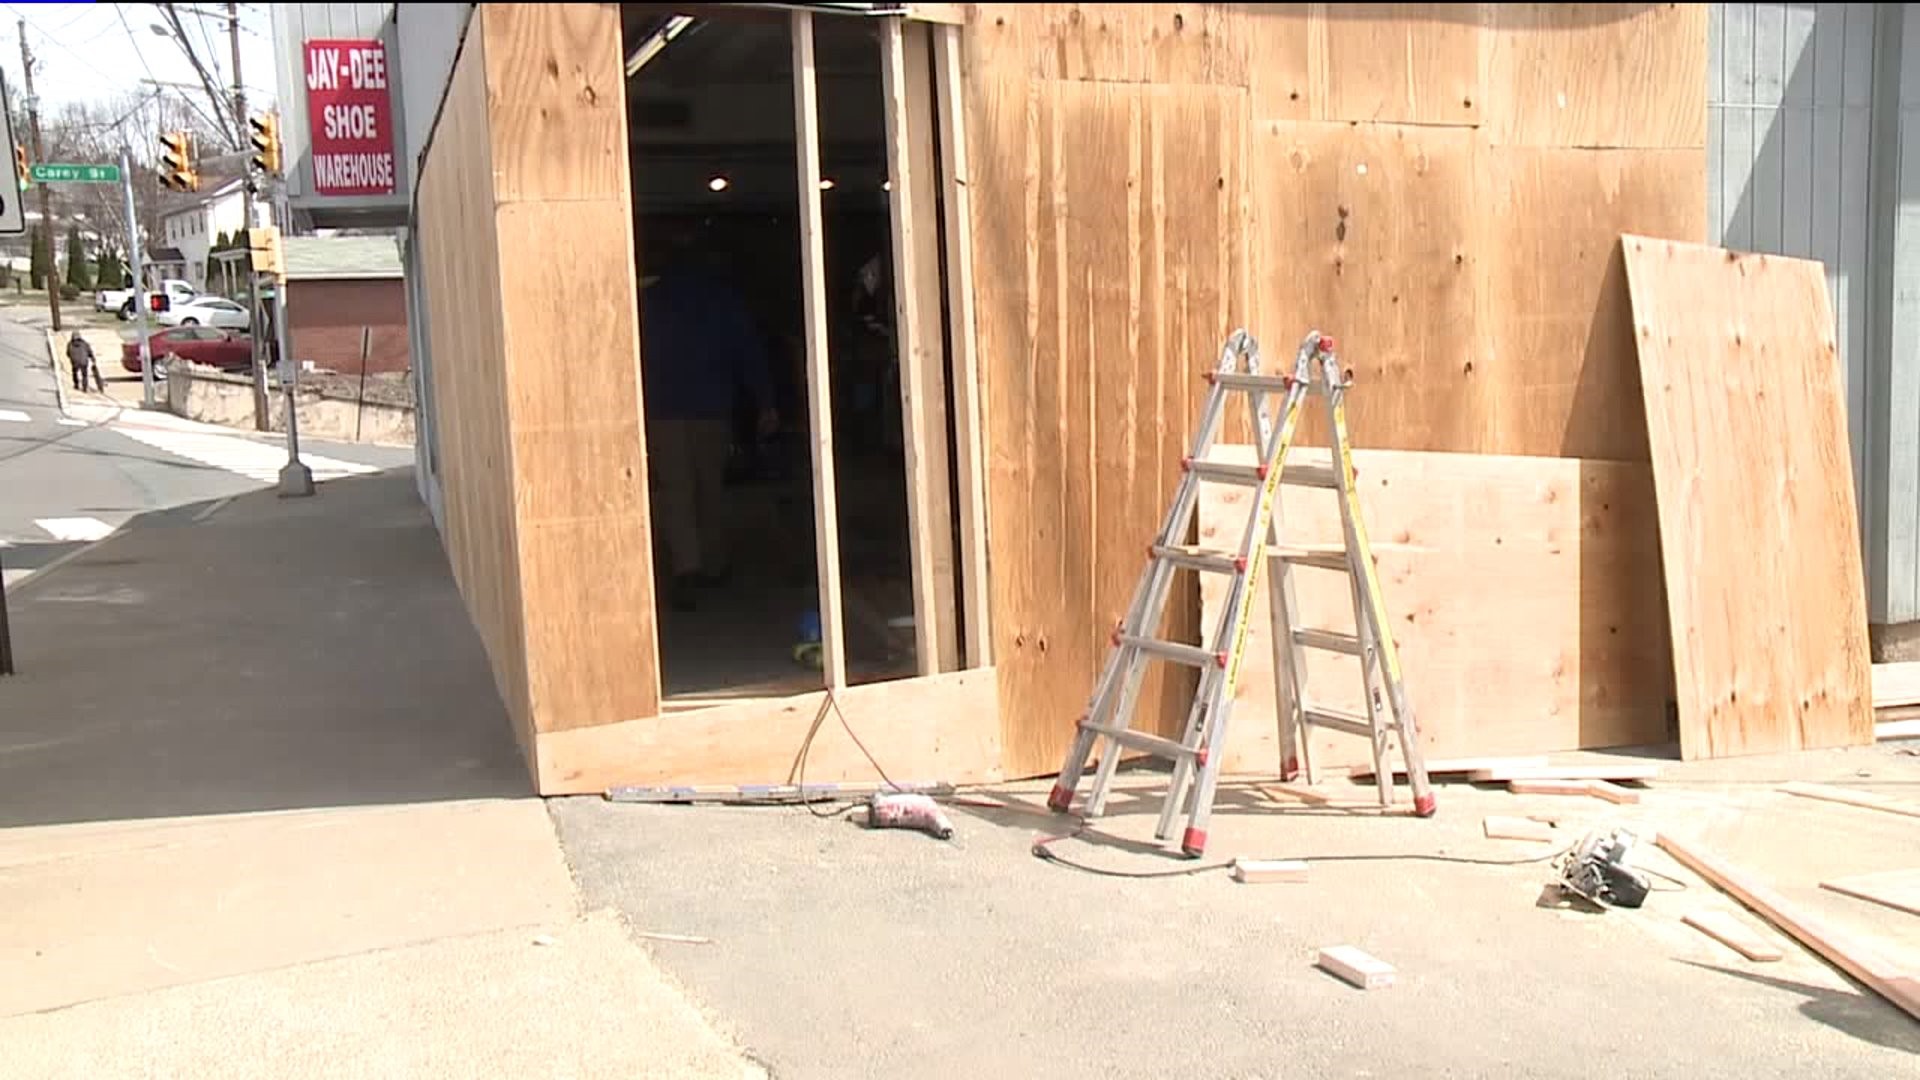 Repairs After Business Hit by SUV